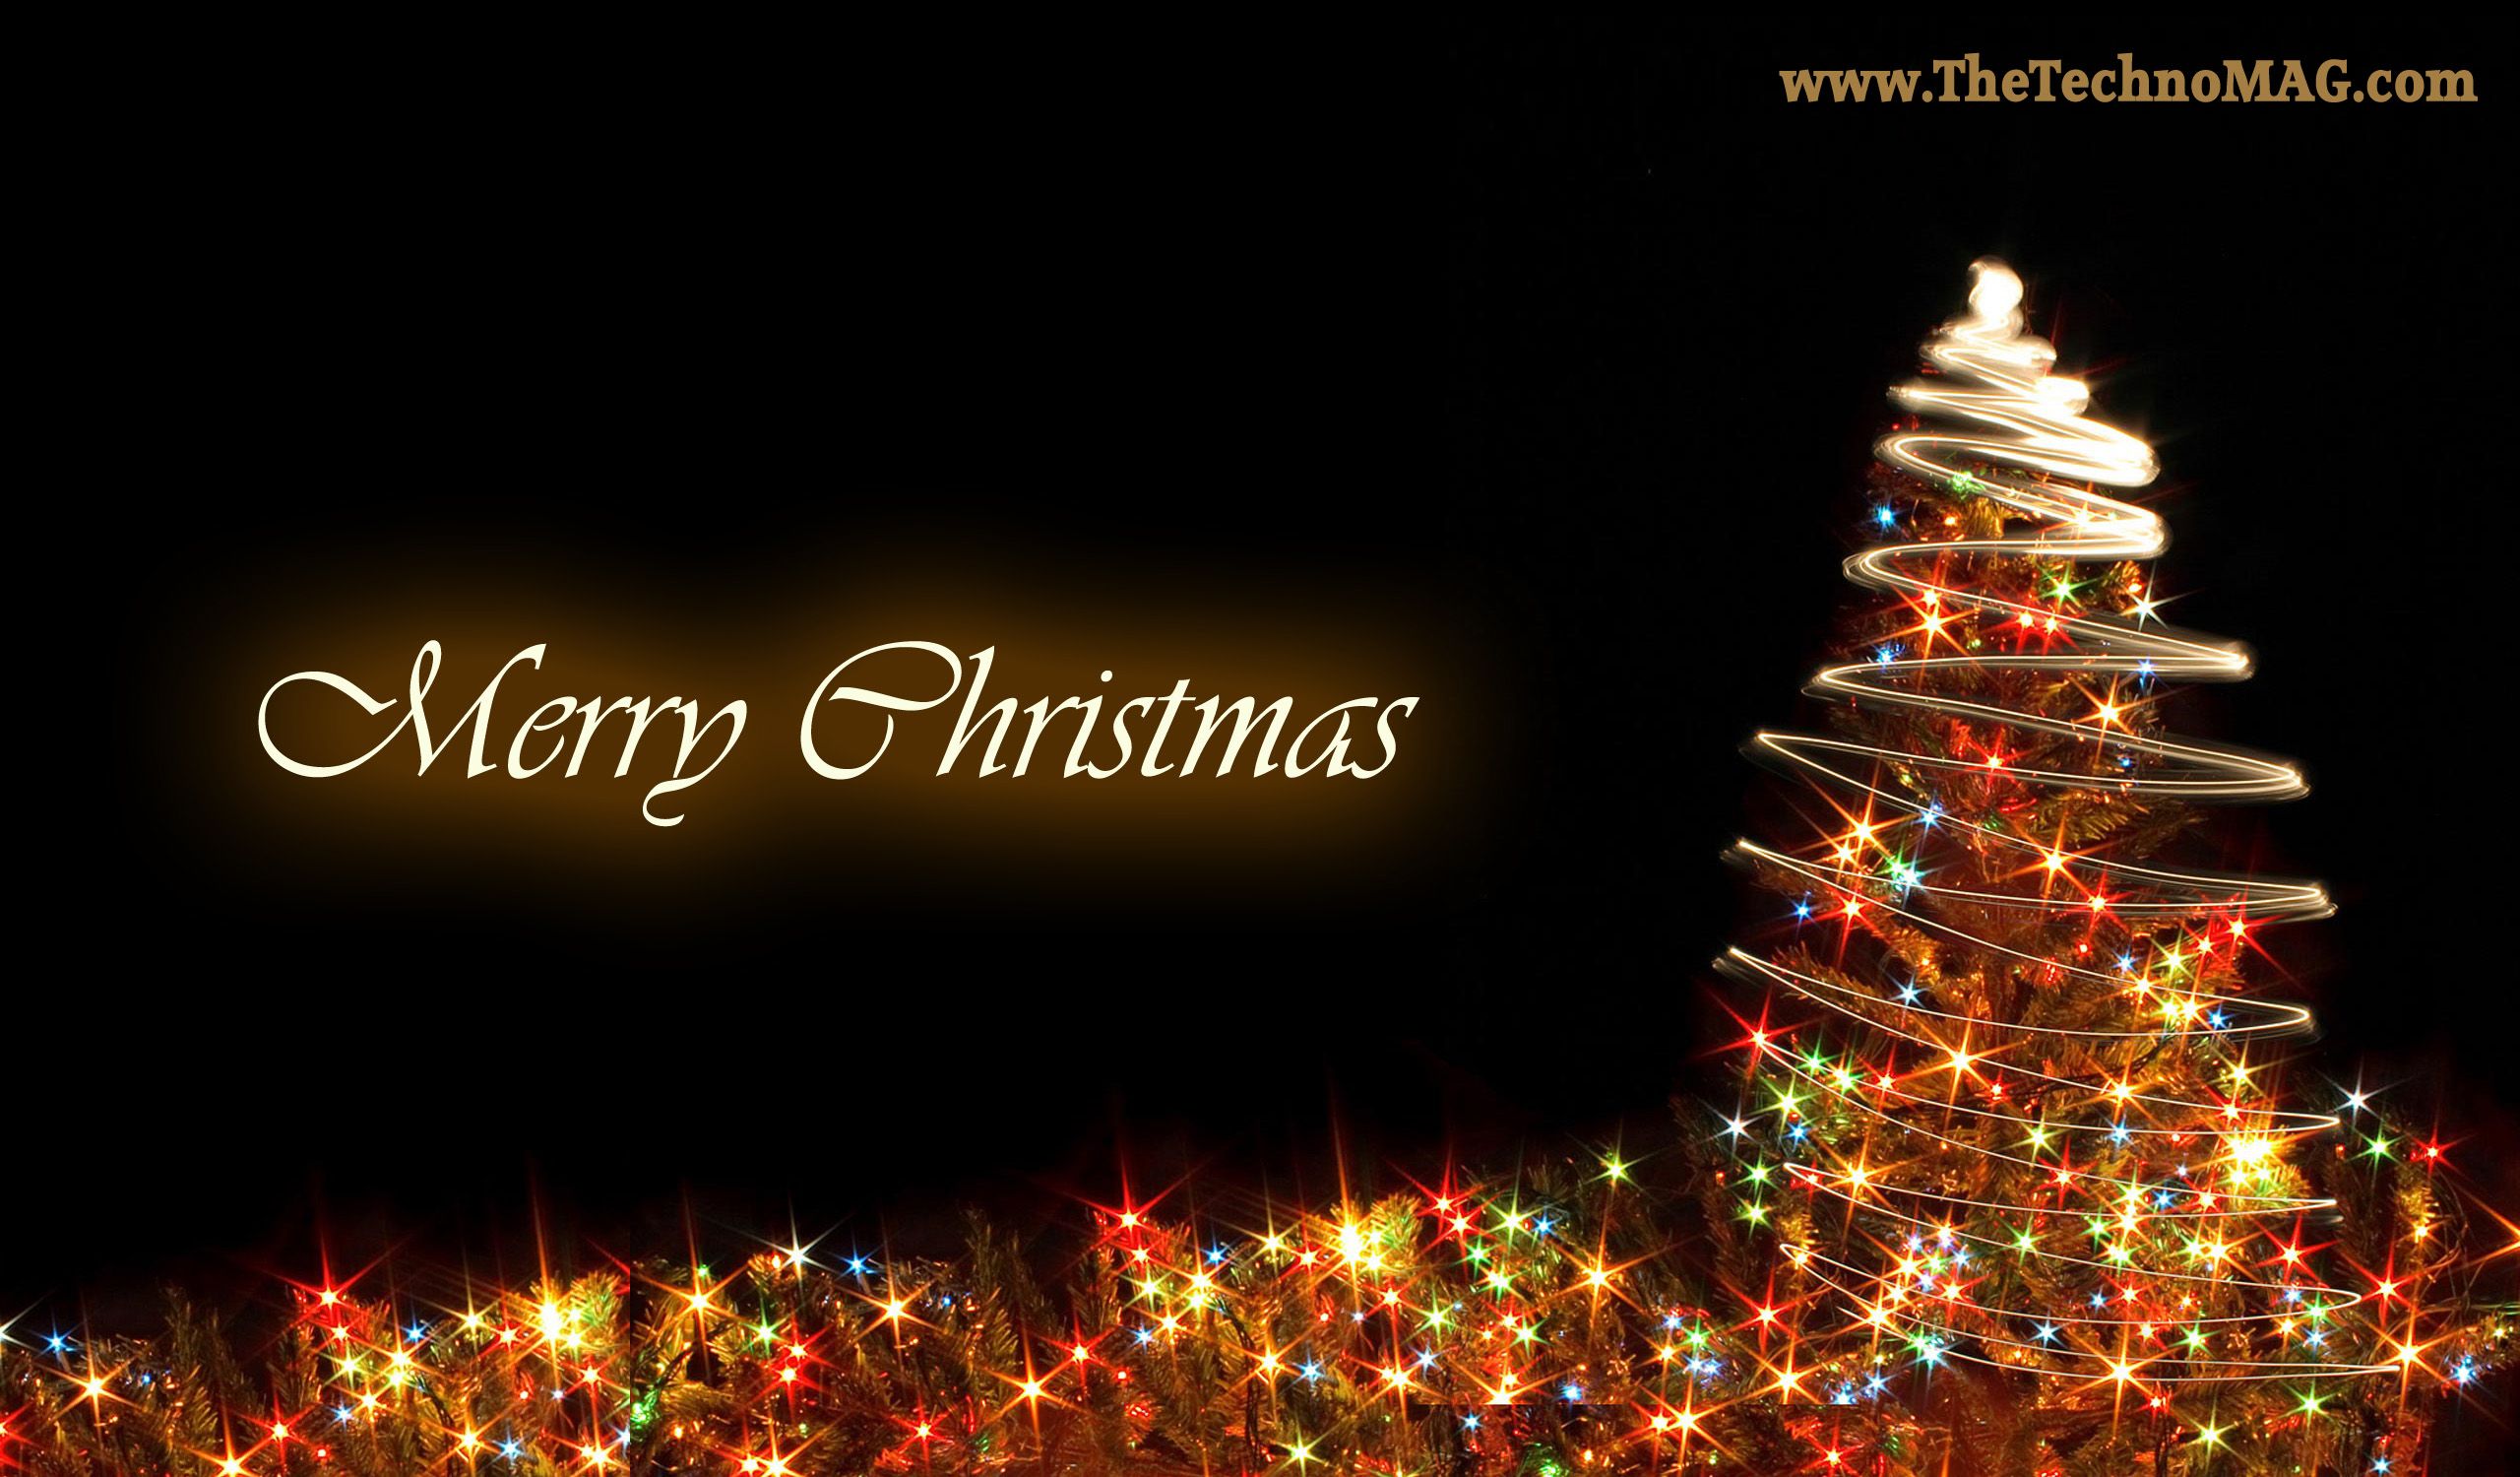 Merry Christmas tree free download wallpaper